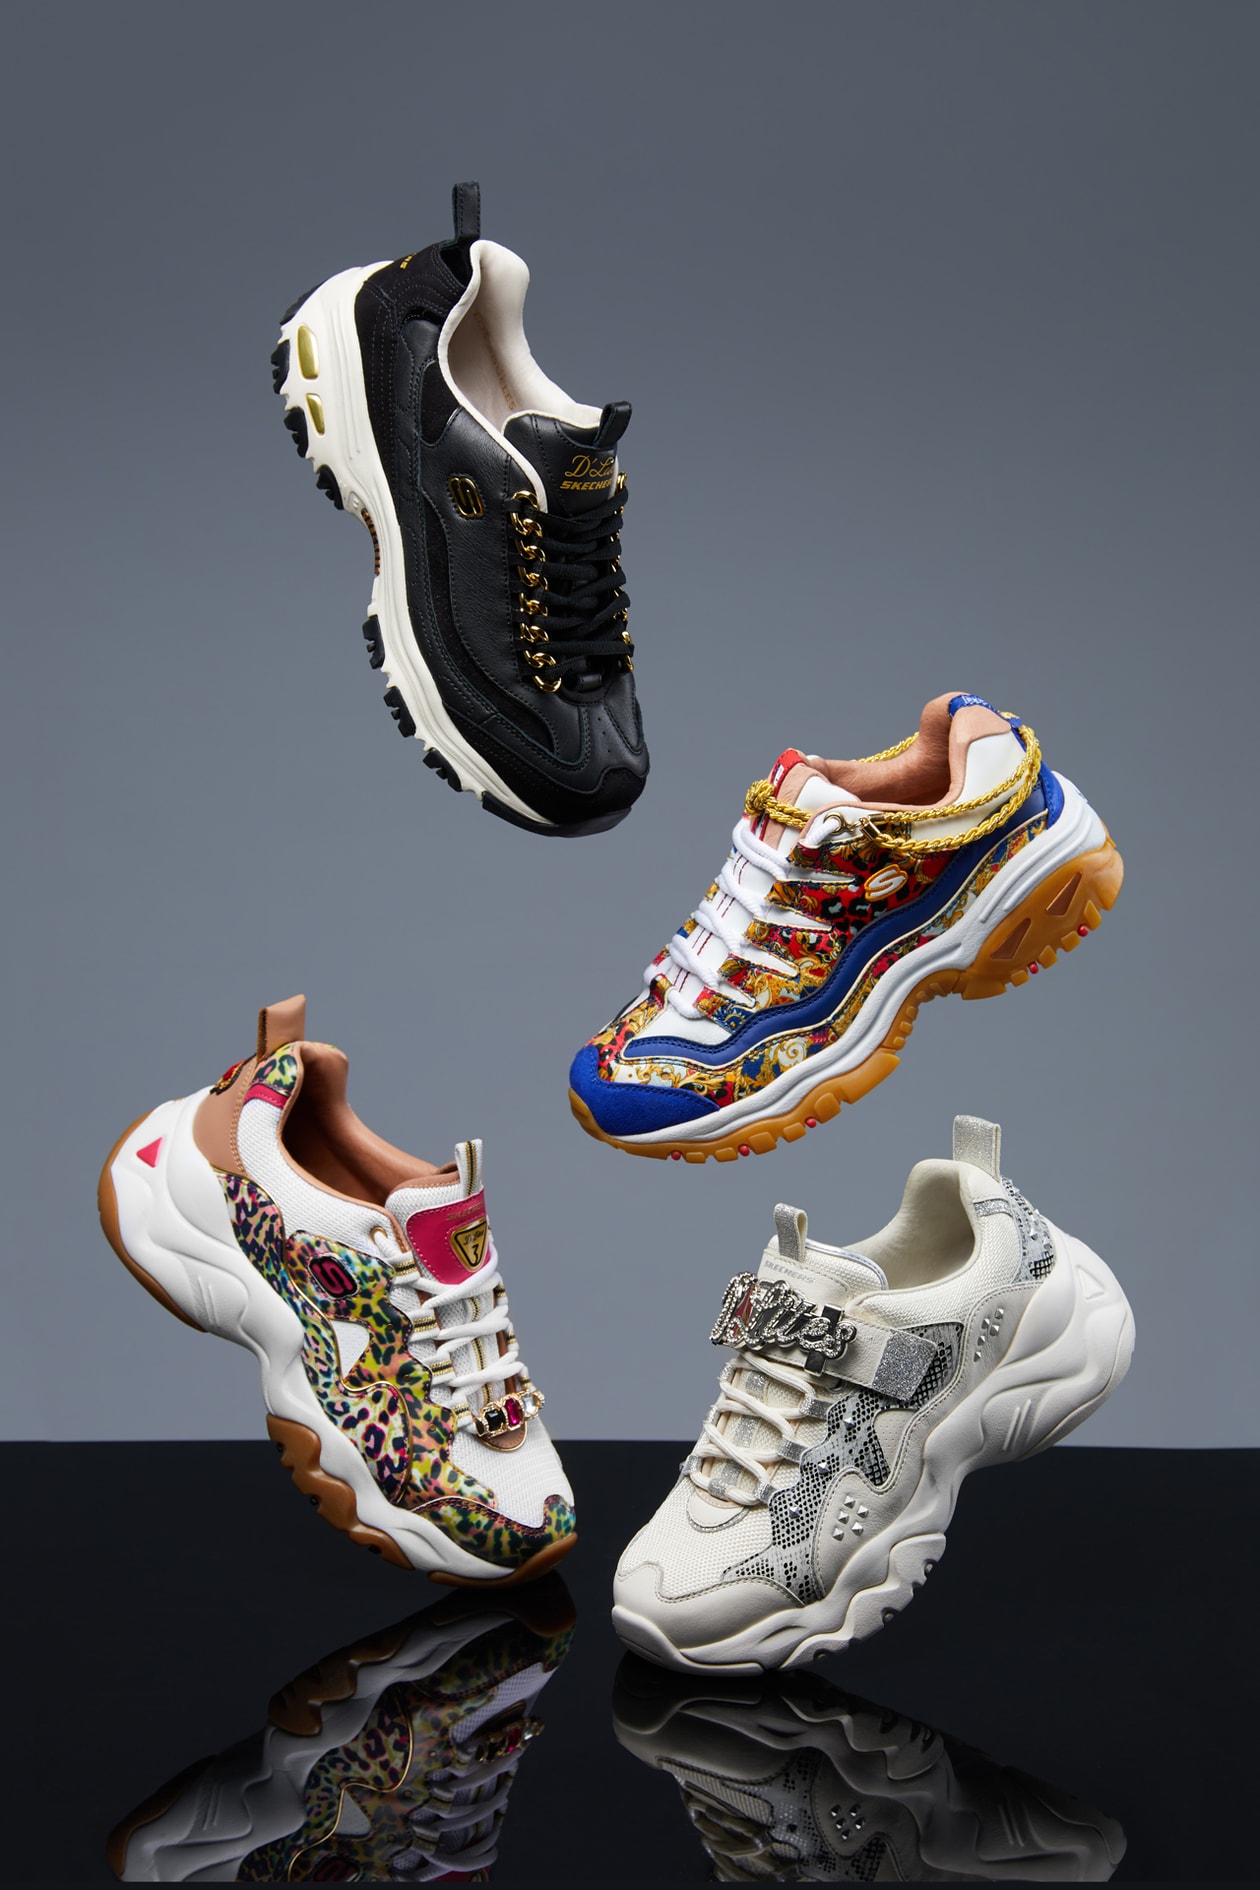 Skechers Luxury Material Limited Edition Collection Heritage premium quality Skechers D'Lites Skechers D'Lites 3.0 Skechers Energy Flashy Stud Cheetah Queen Golden Idea Captains View iconic designs classic silhouettes